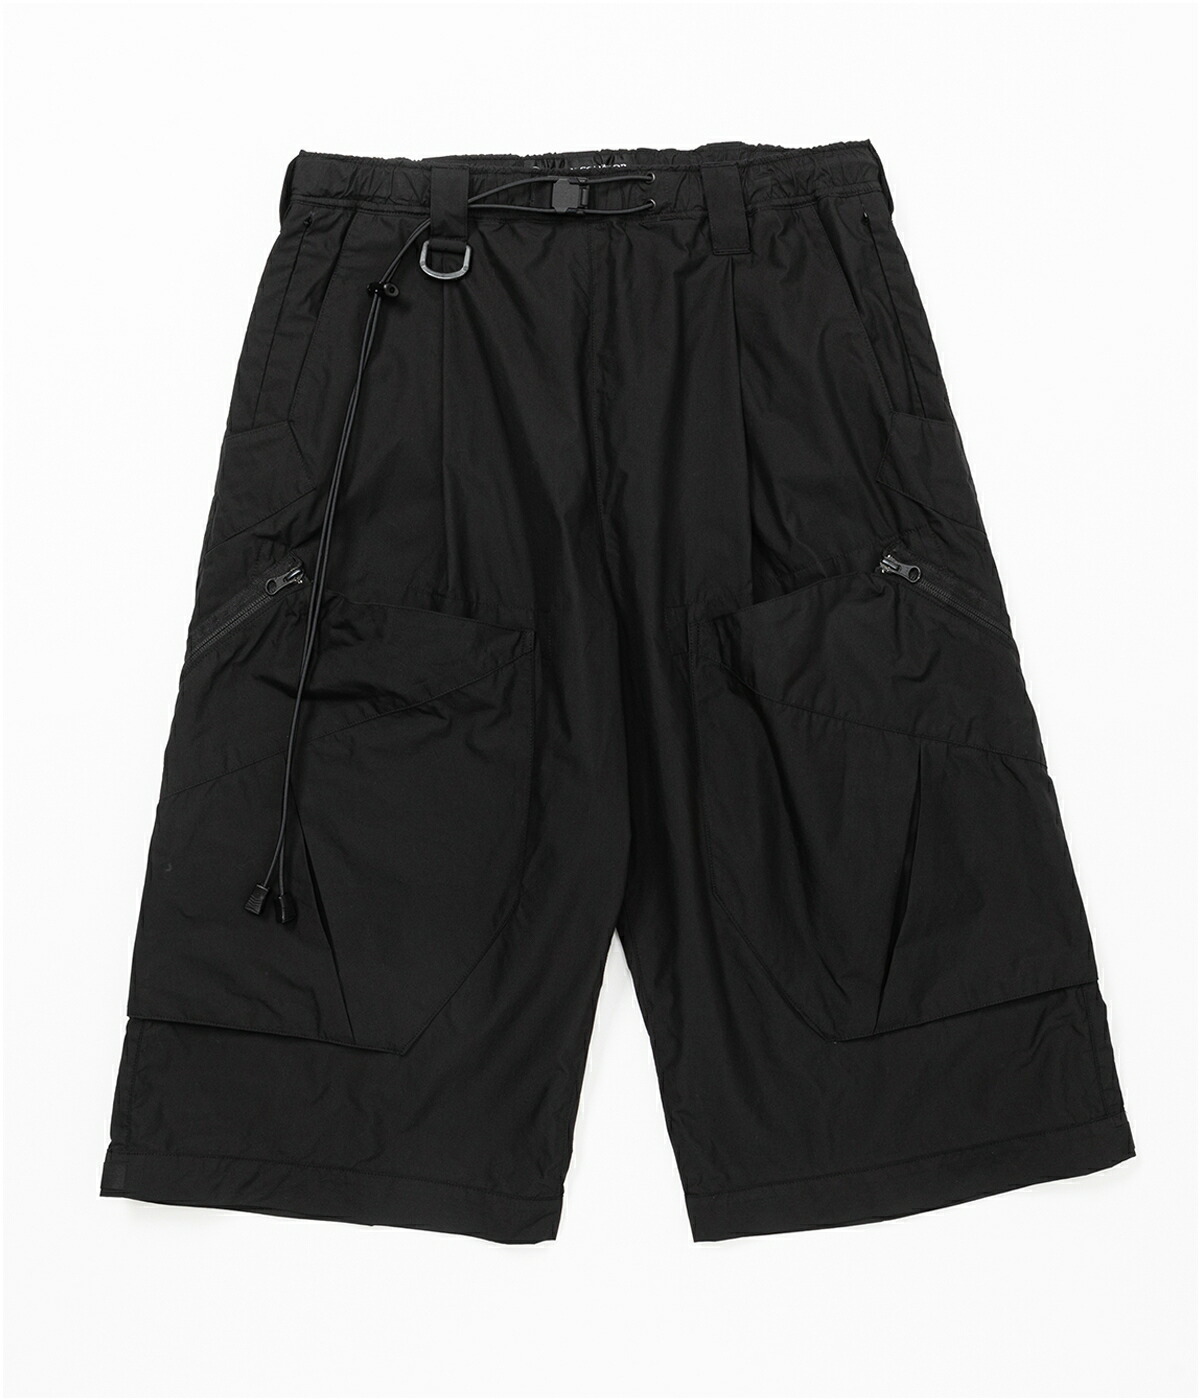 MOUT RECON TAILOR / マウトリーコンテーラー ： SUMMERWEIGHT SHO...